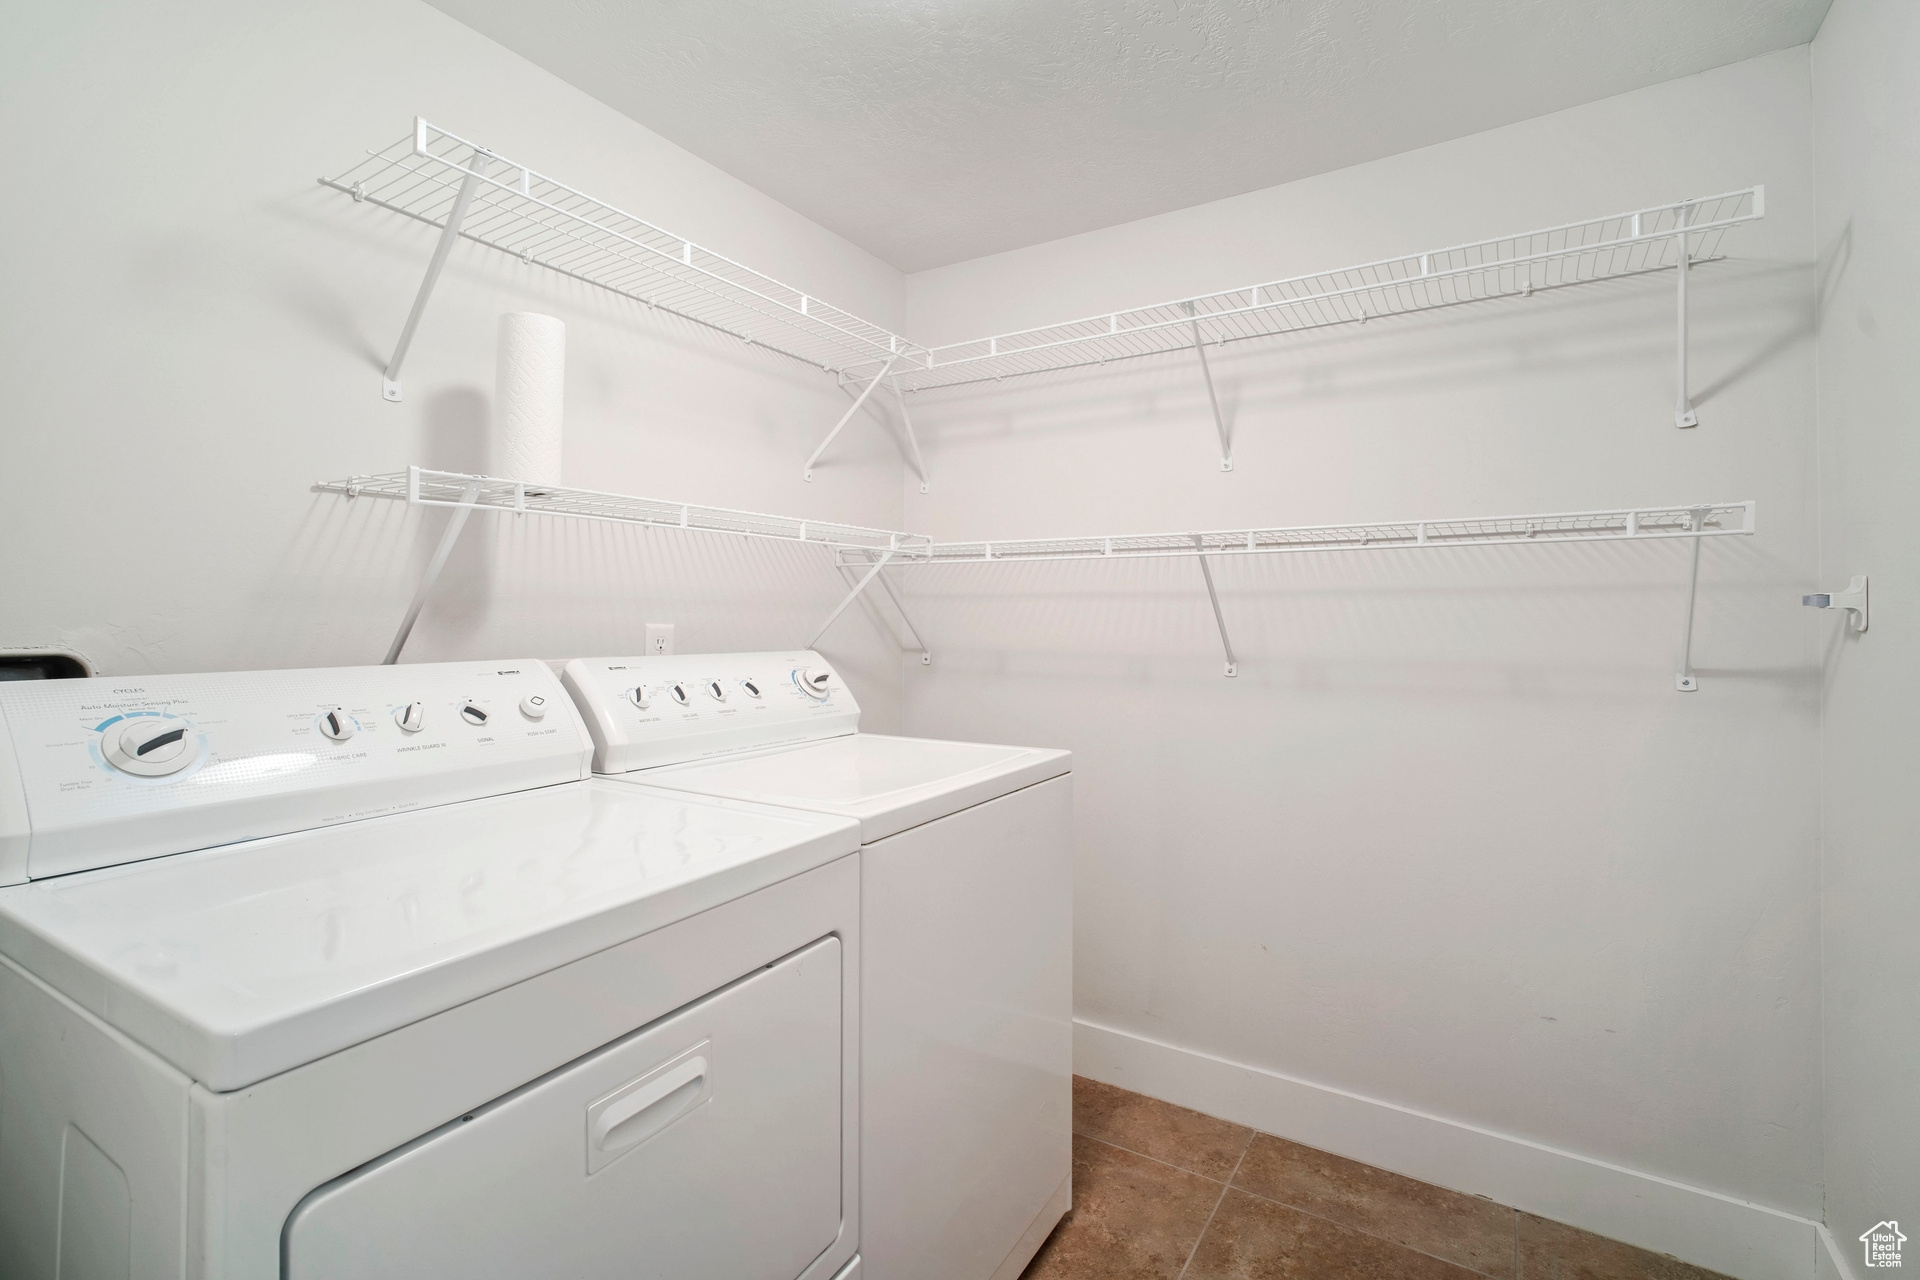 Features plenty of shelving for storage, washer and dryer are included.